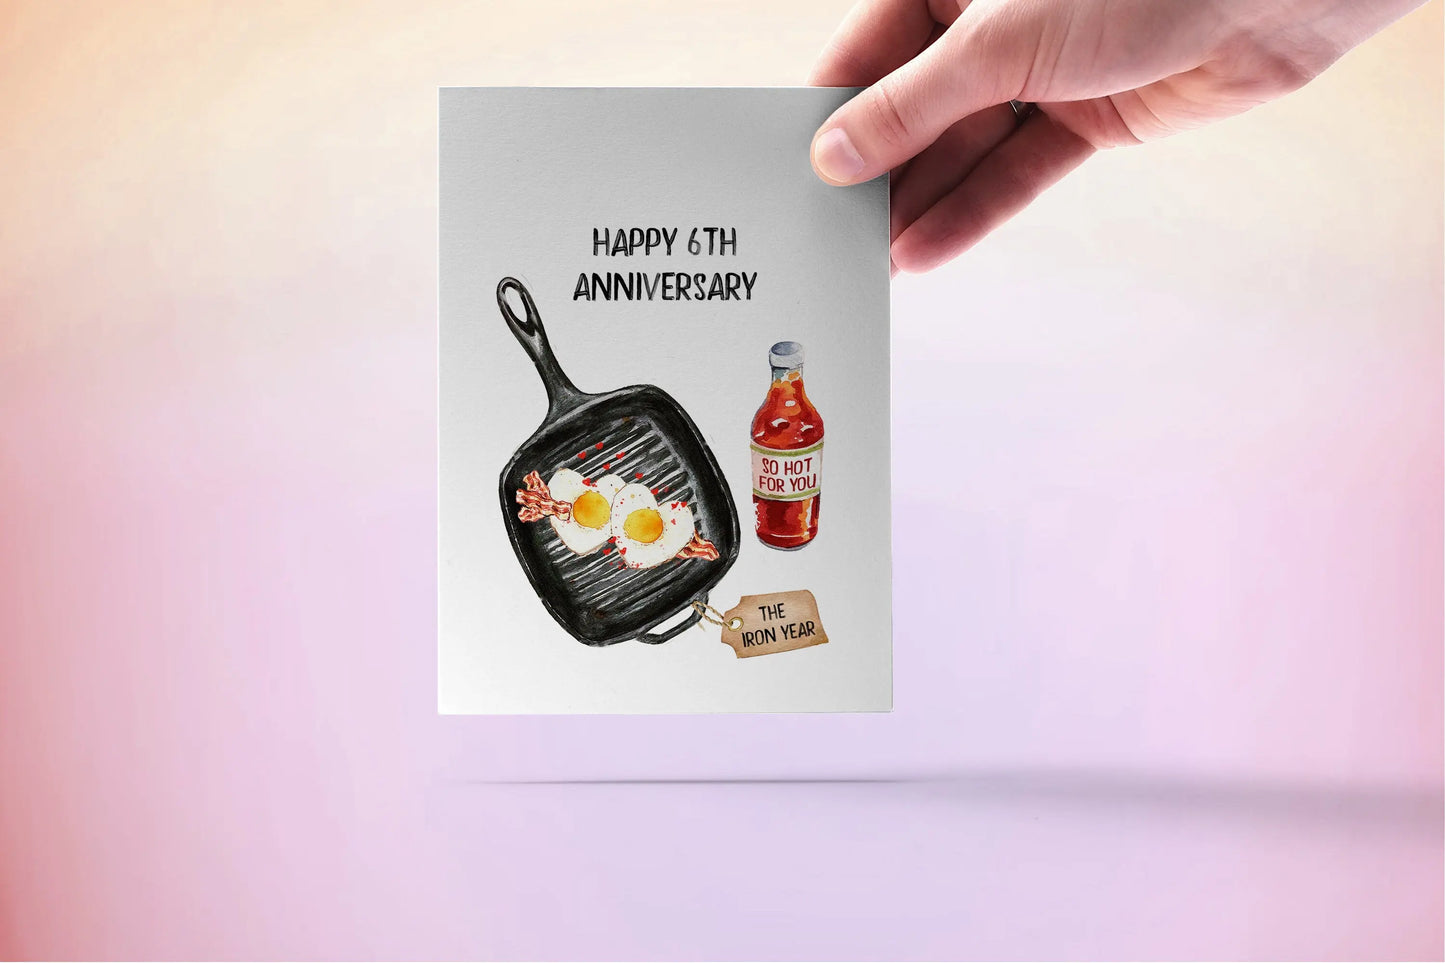 6th Iron Anniversary Card For Husband - Cast Iron Gifts - Funny Anniversary Cards For Him